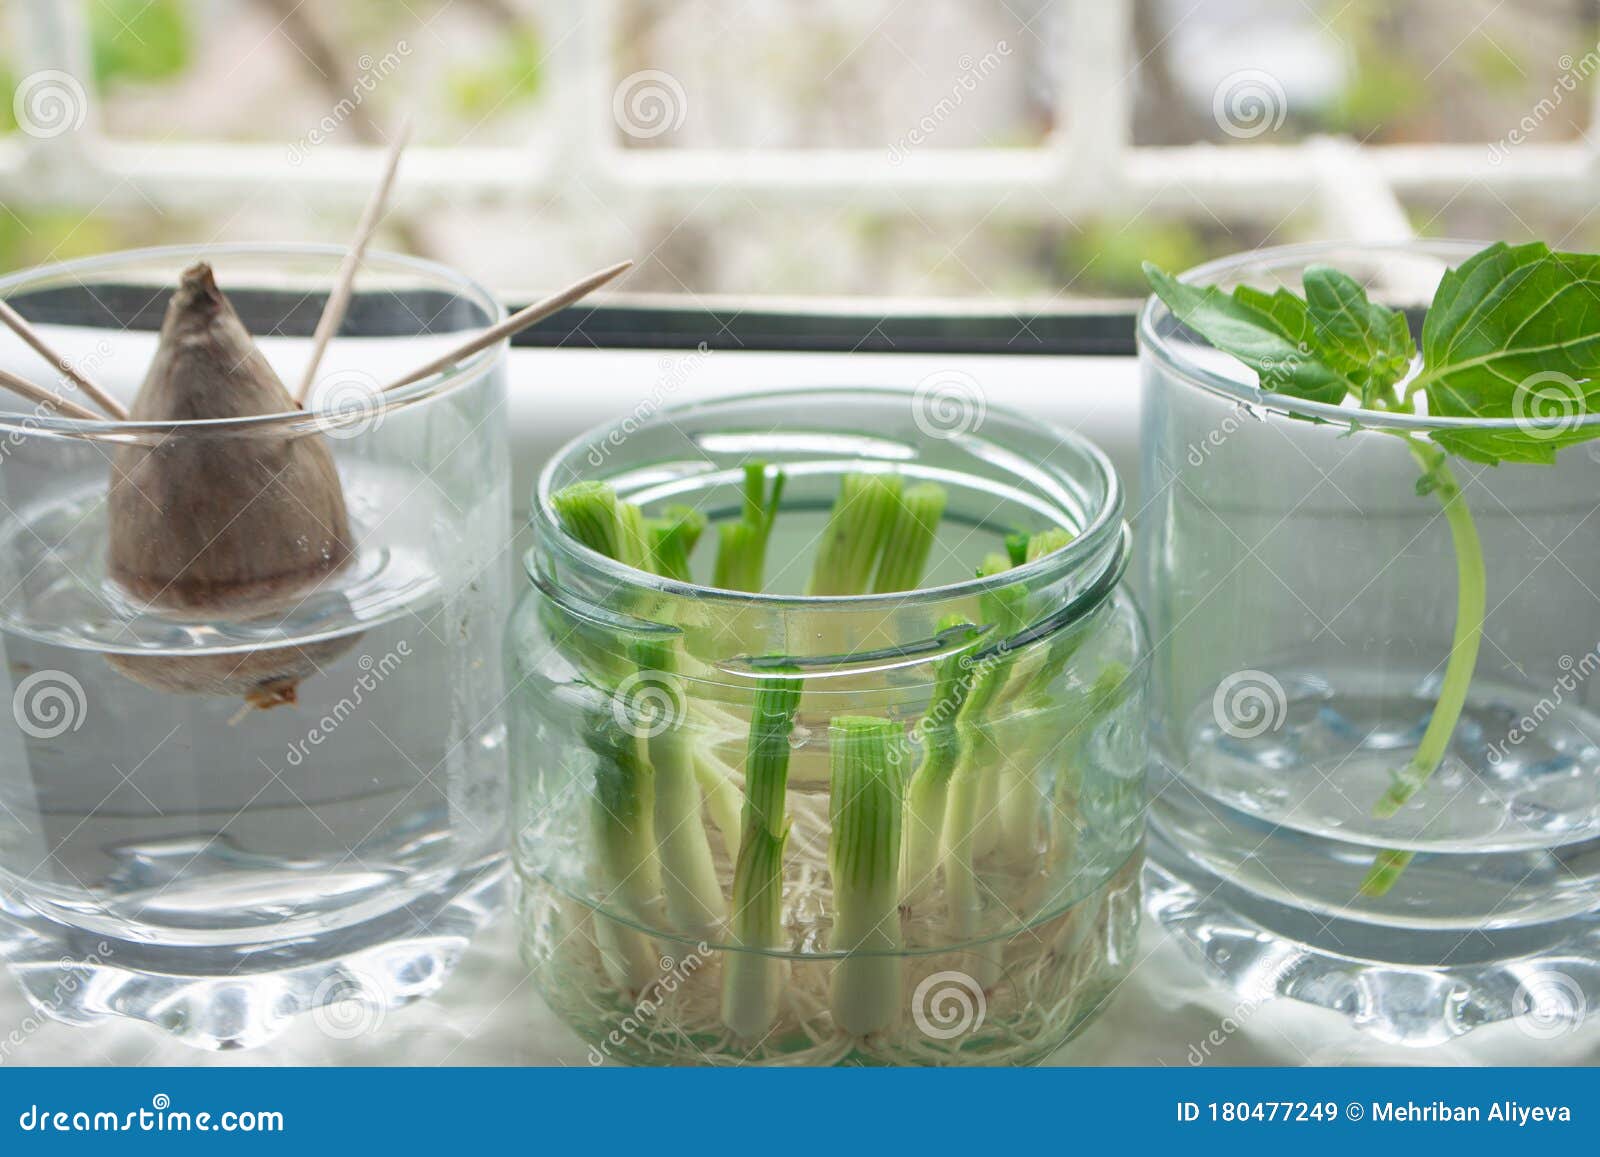 growing green onions scallions from scraps, avocado from seed and rooting basil in water